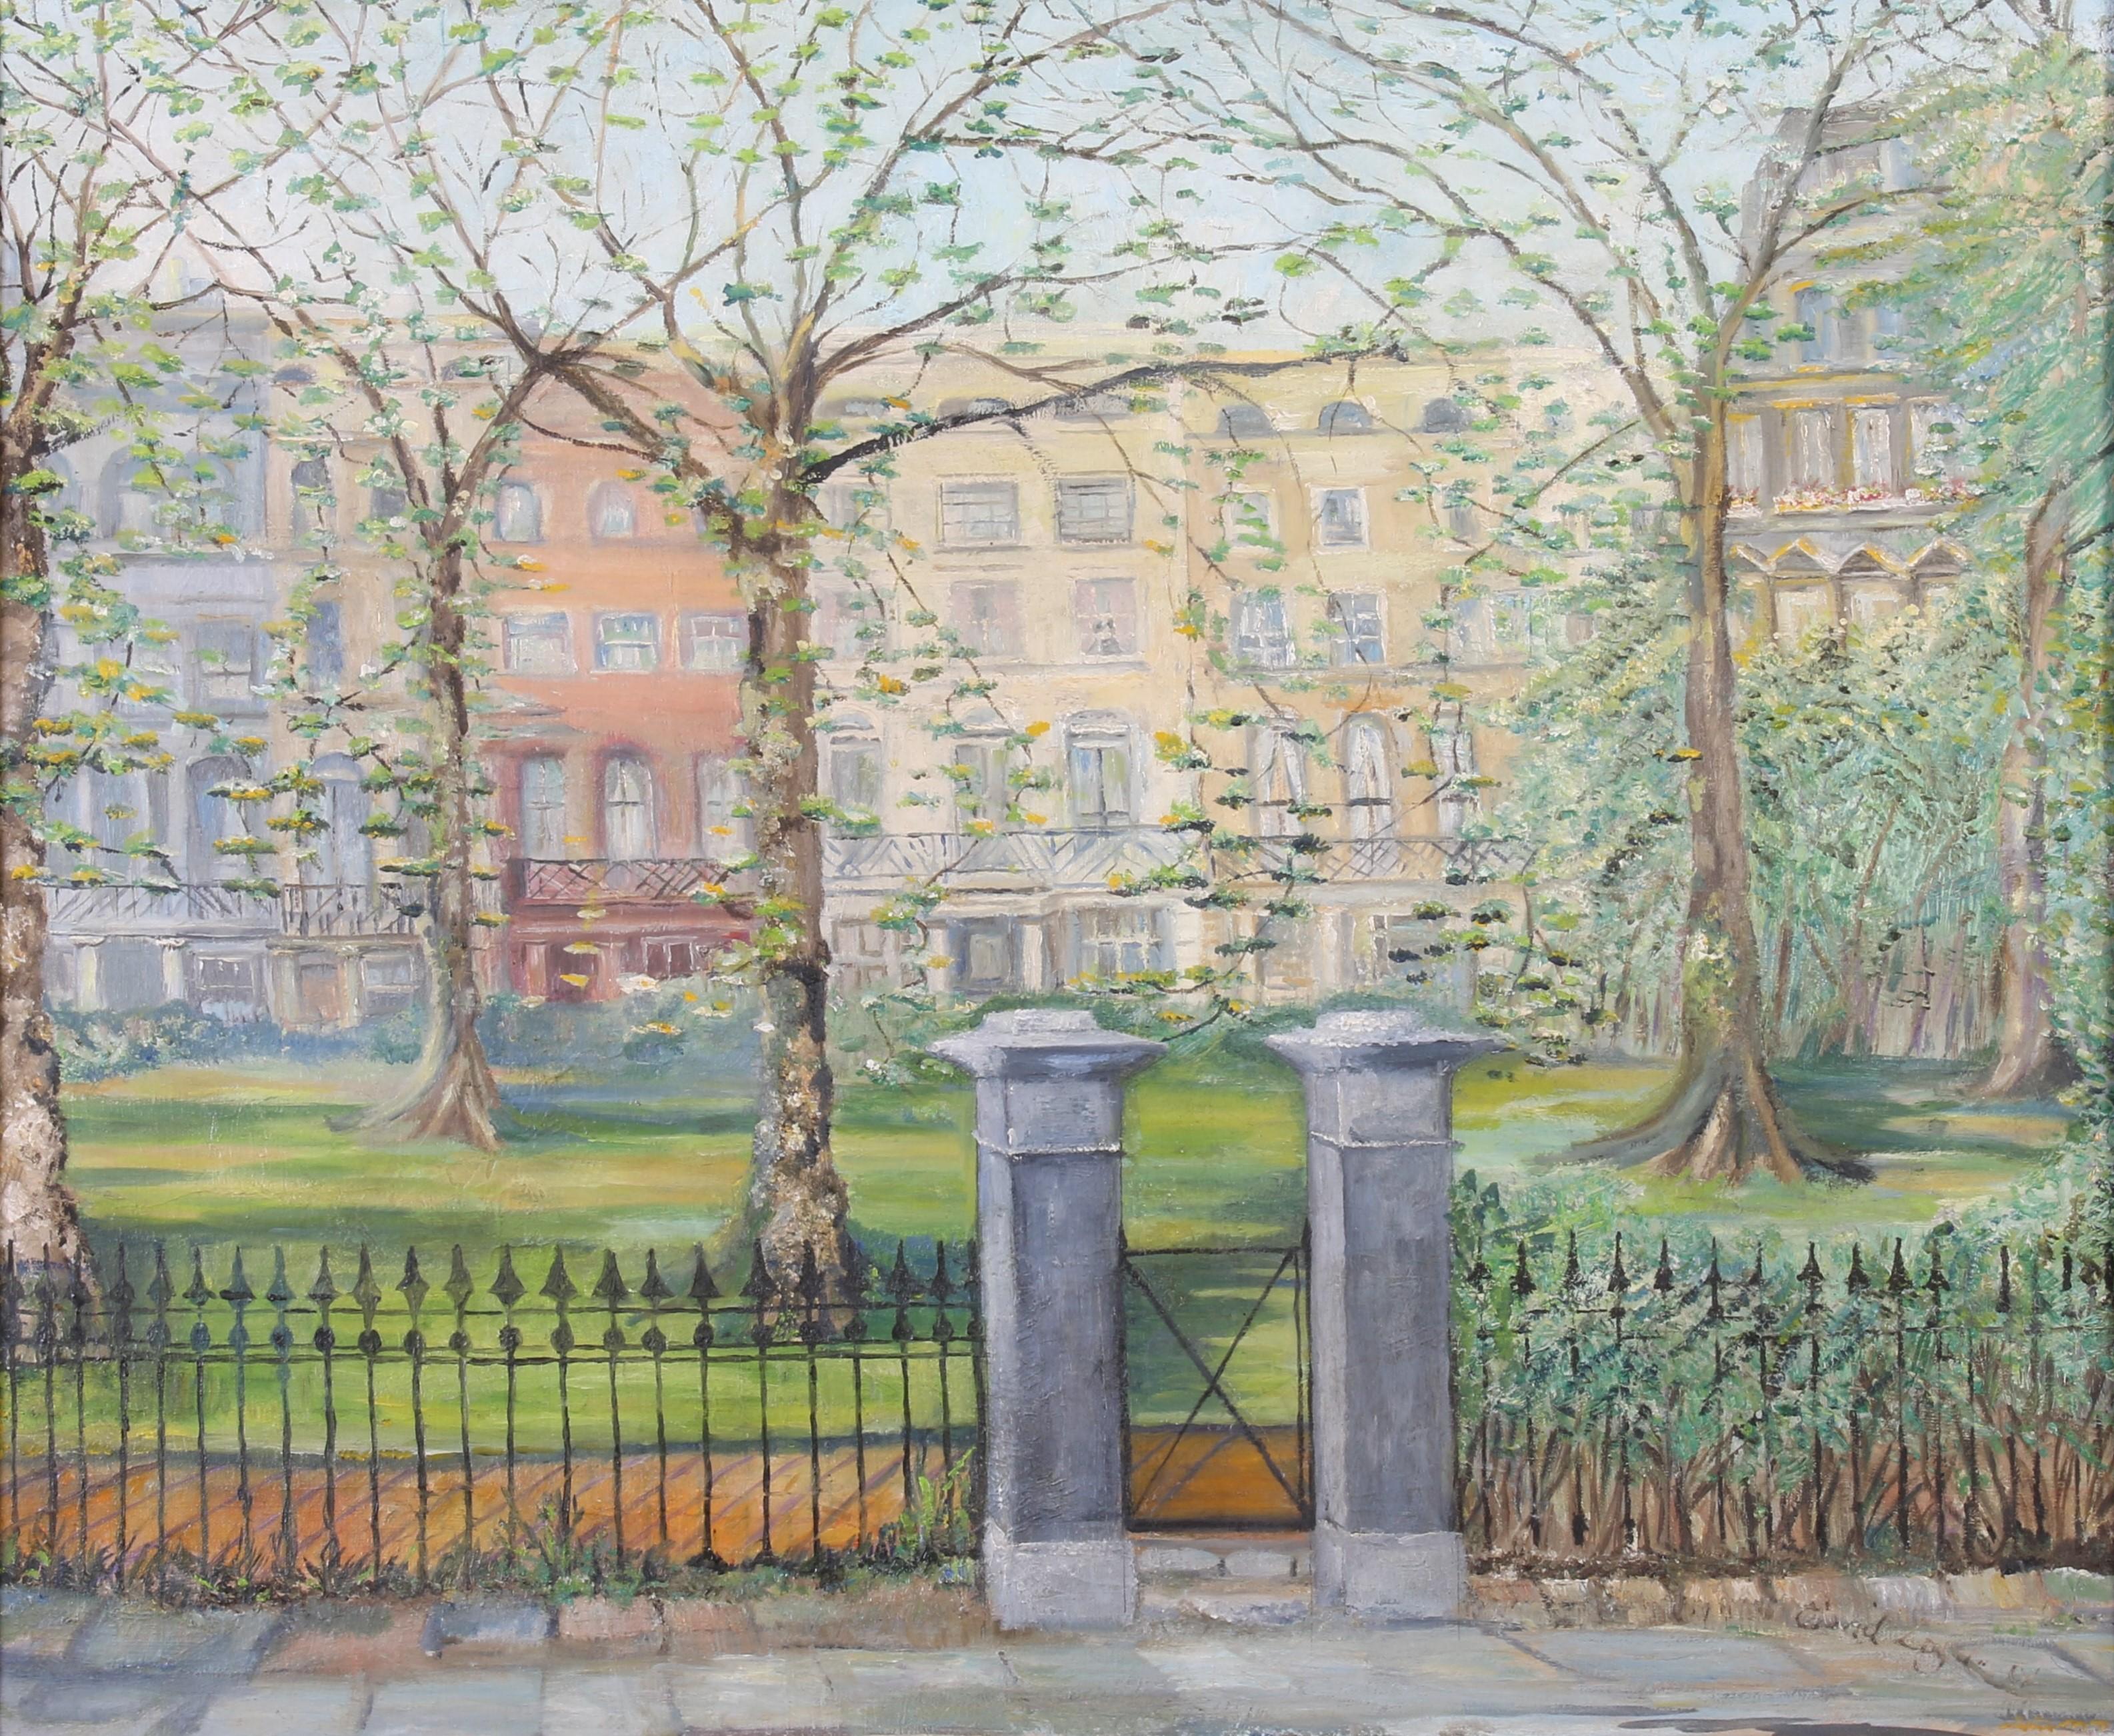 Eric Henri Kennington R.A.  1888-1960 , was an English painter, sculptor and illustrator, and was a War Artist in both the first and second World Wars. This painting, oil on canvas, signed lower right, is a view through the trees of Brunswick Square